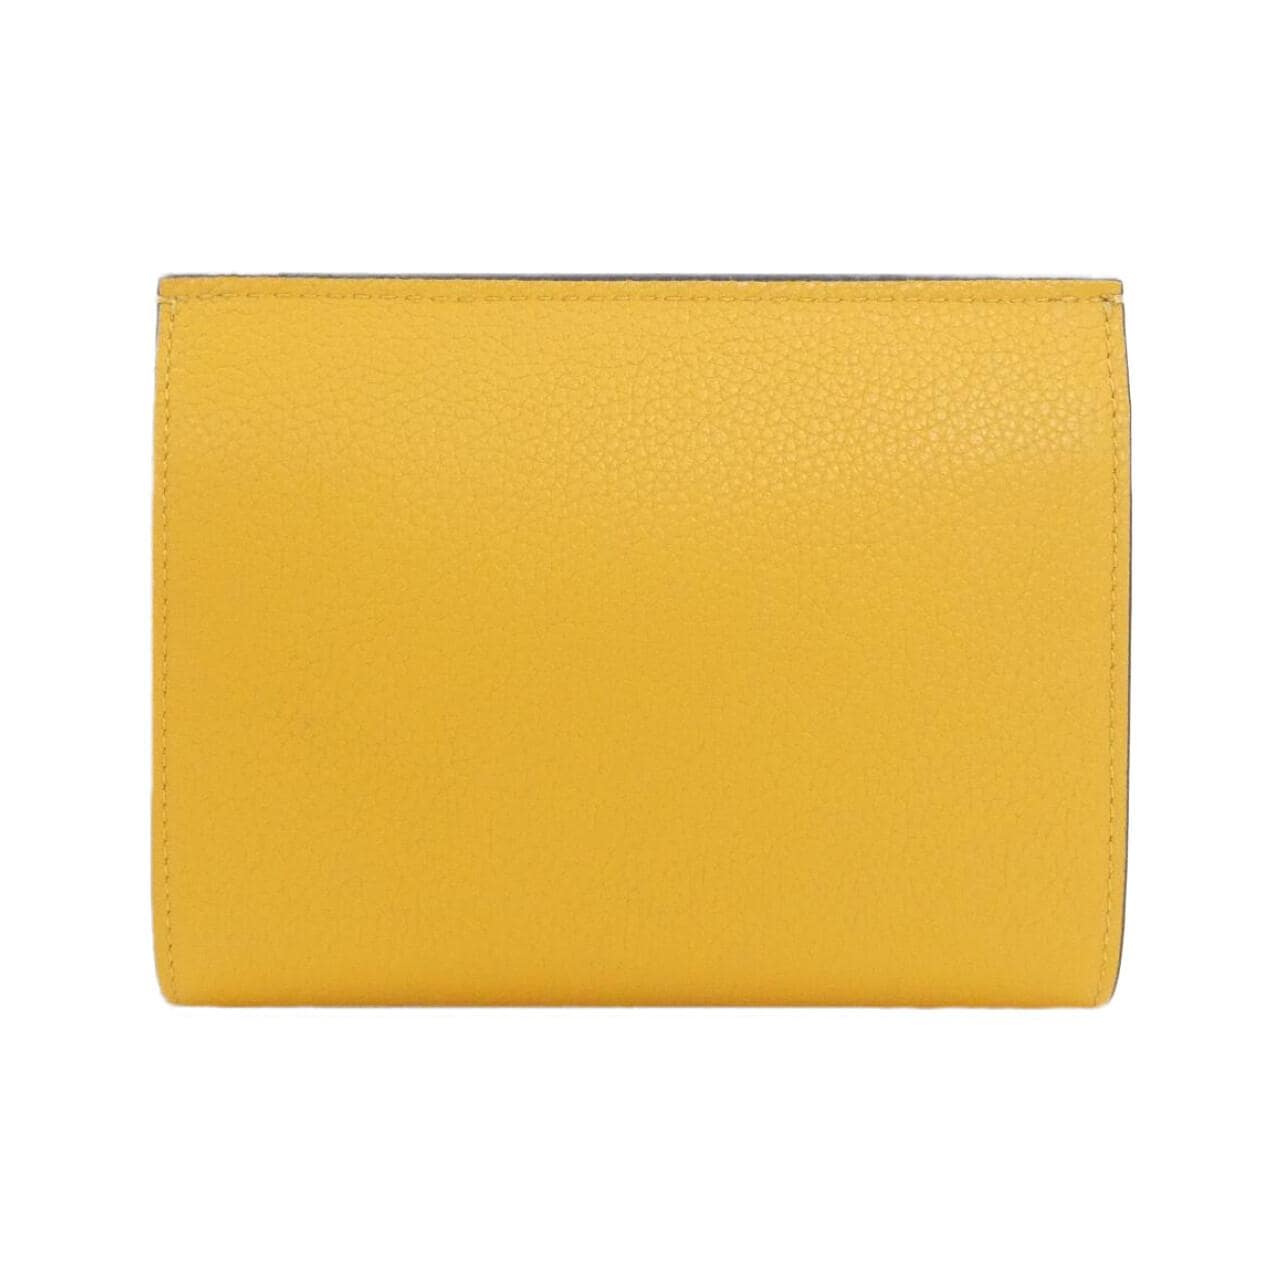 [BRAND NEW] Mulberry Amberley RL6095 205 Wallet